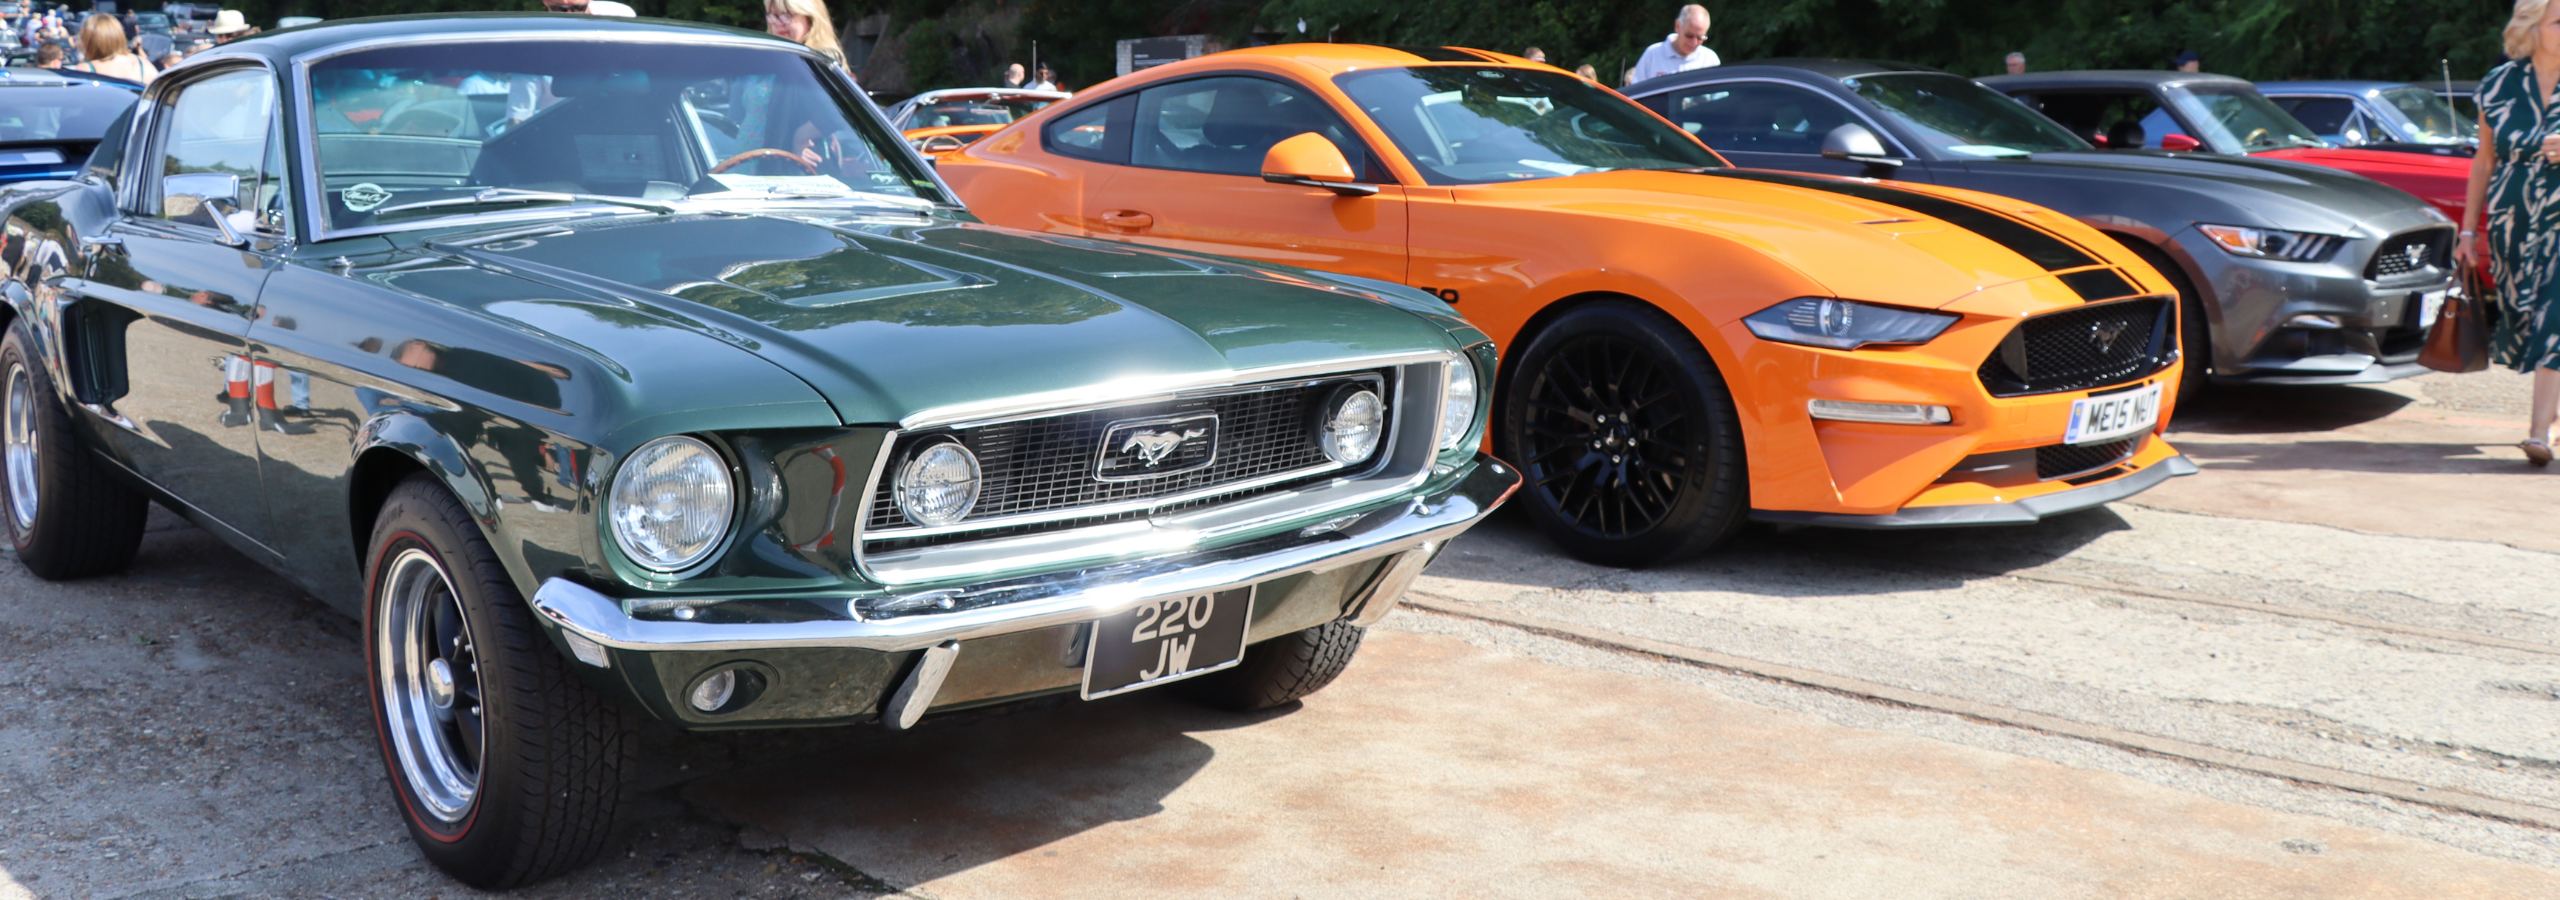 60 Years of Ford Mustang